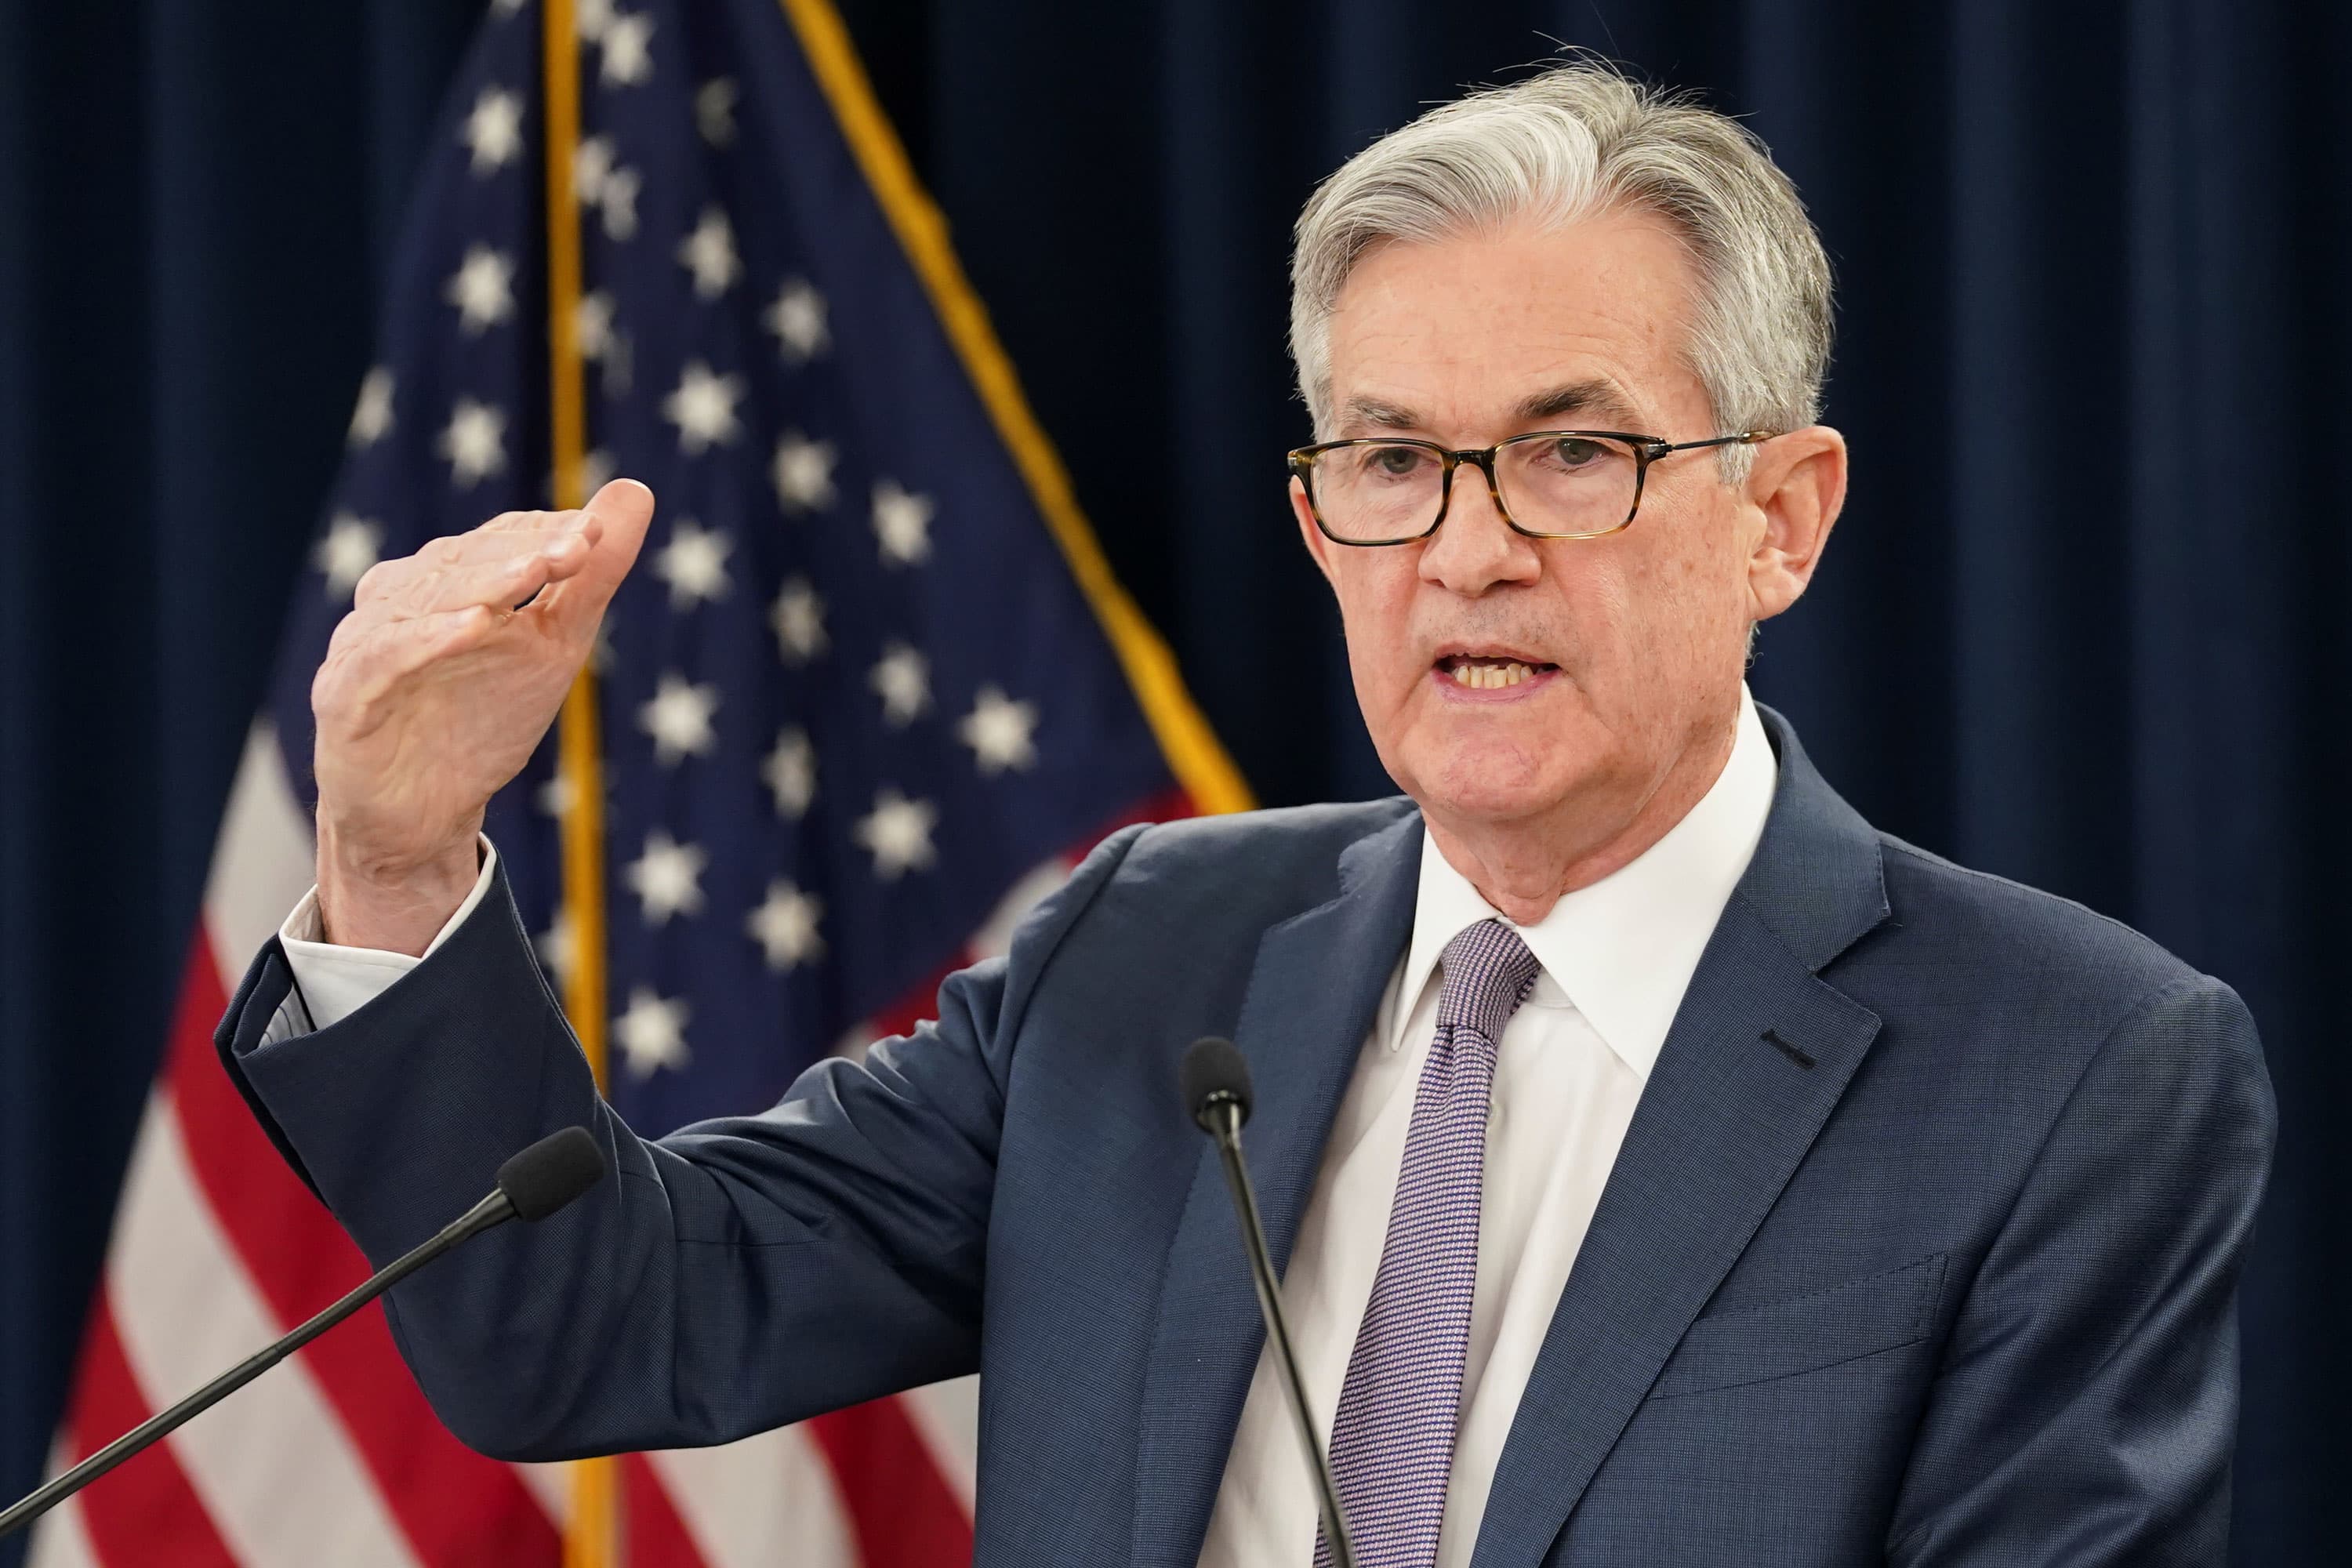 Fed Chair Powell is a “master”, calming the markets and avoiding chaos